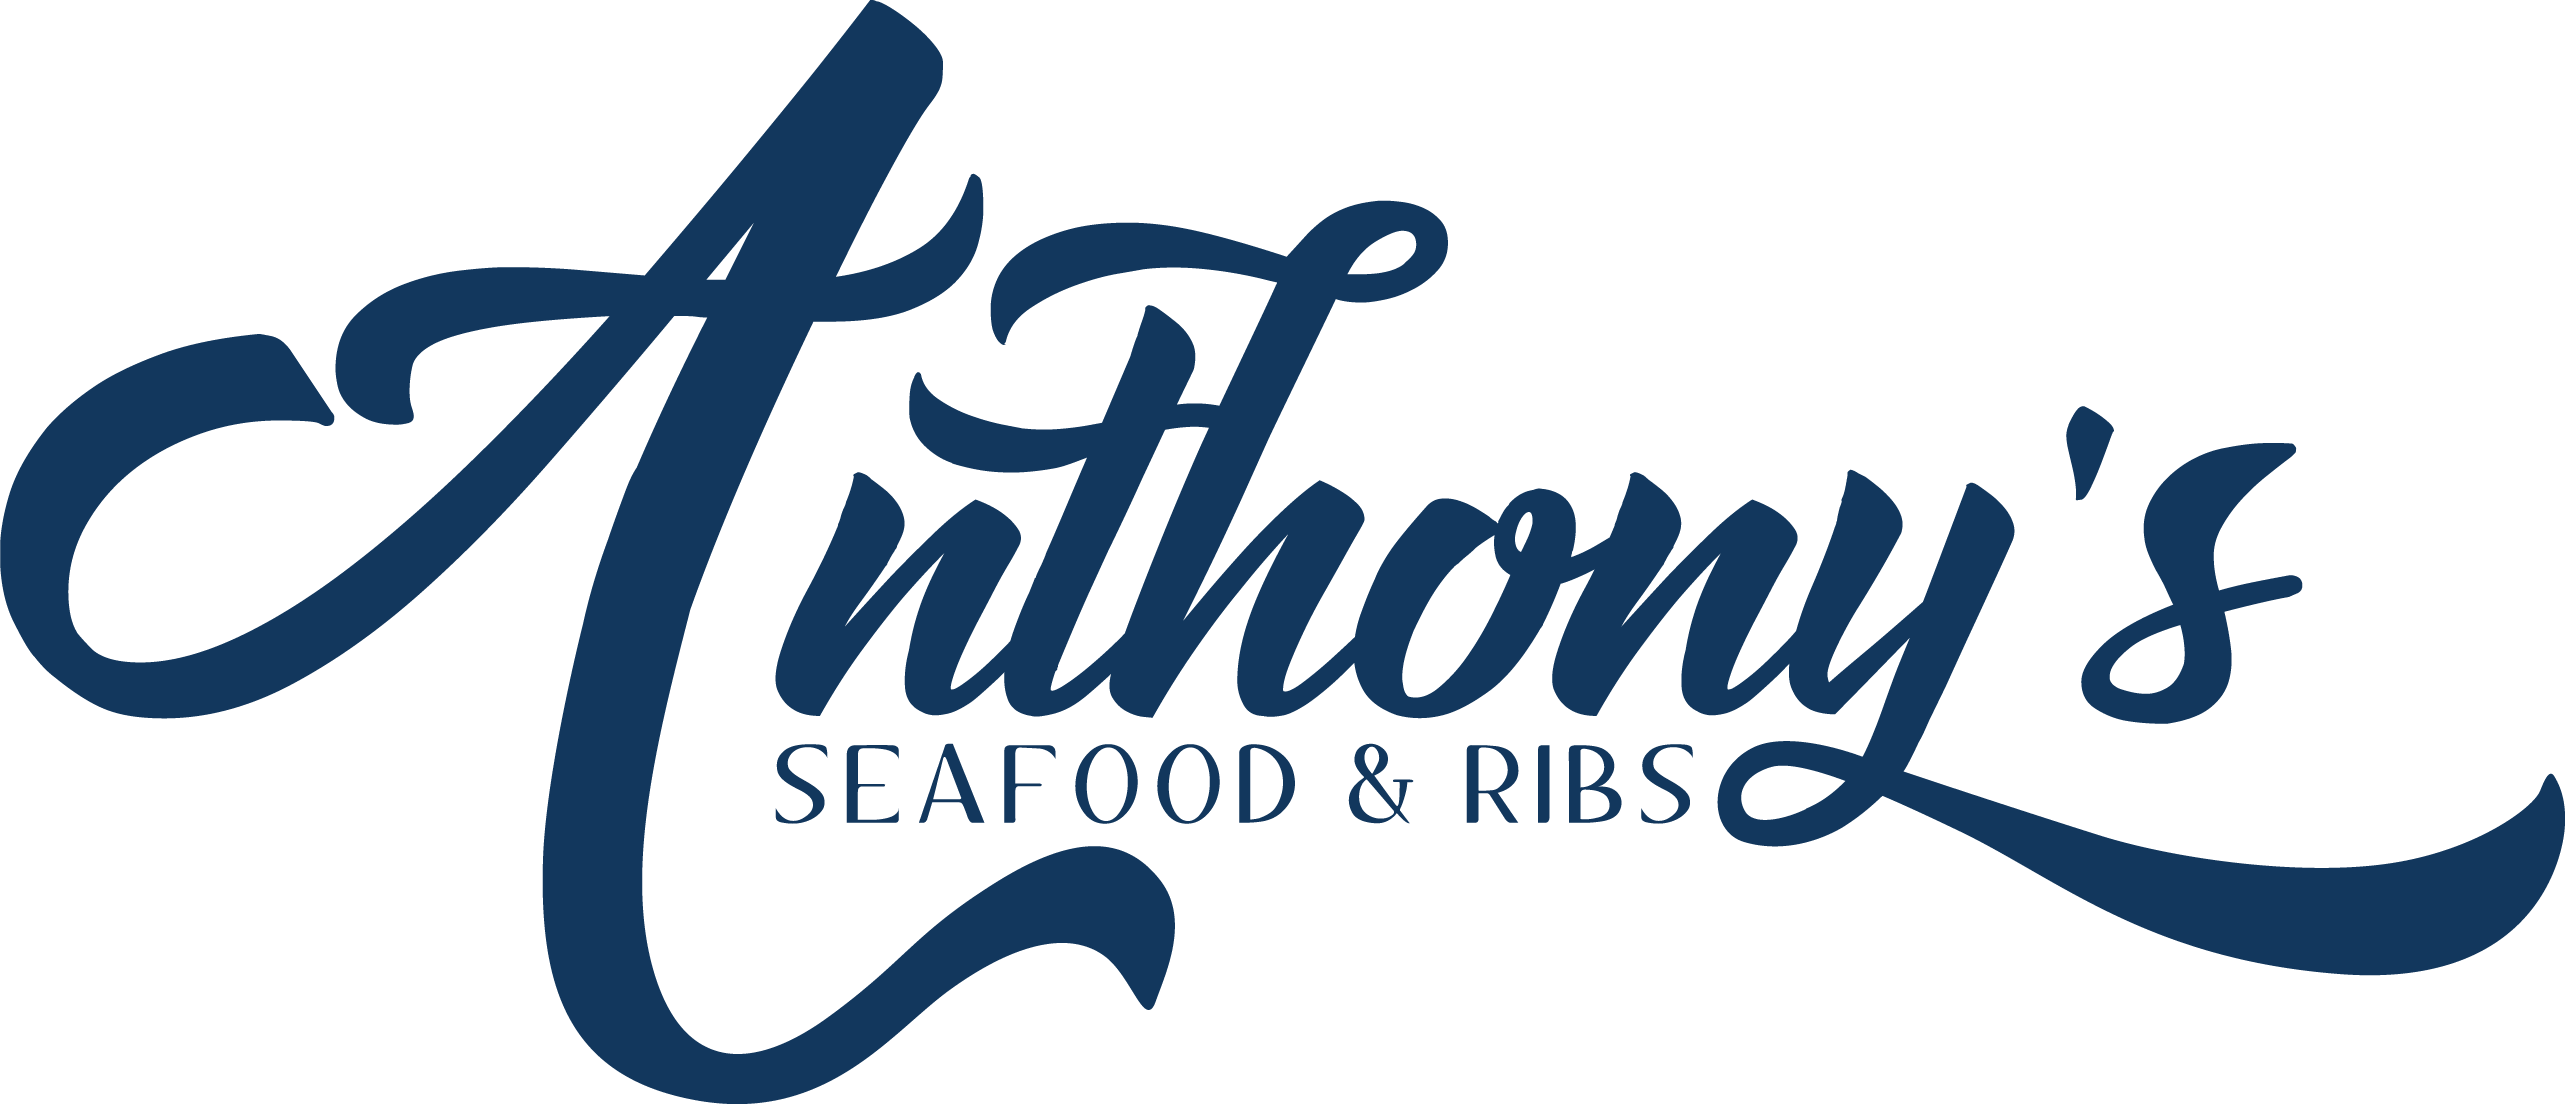 Anthony's Seafood, Pasta & Pizza, Ribs